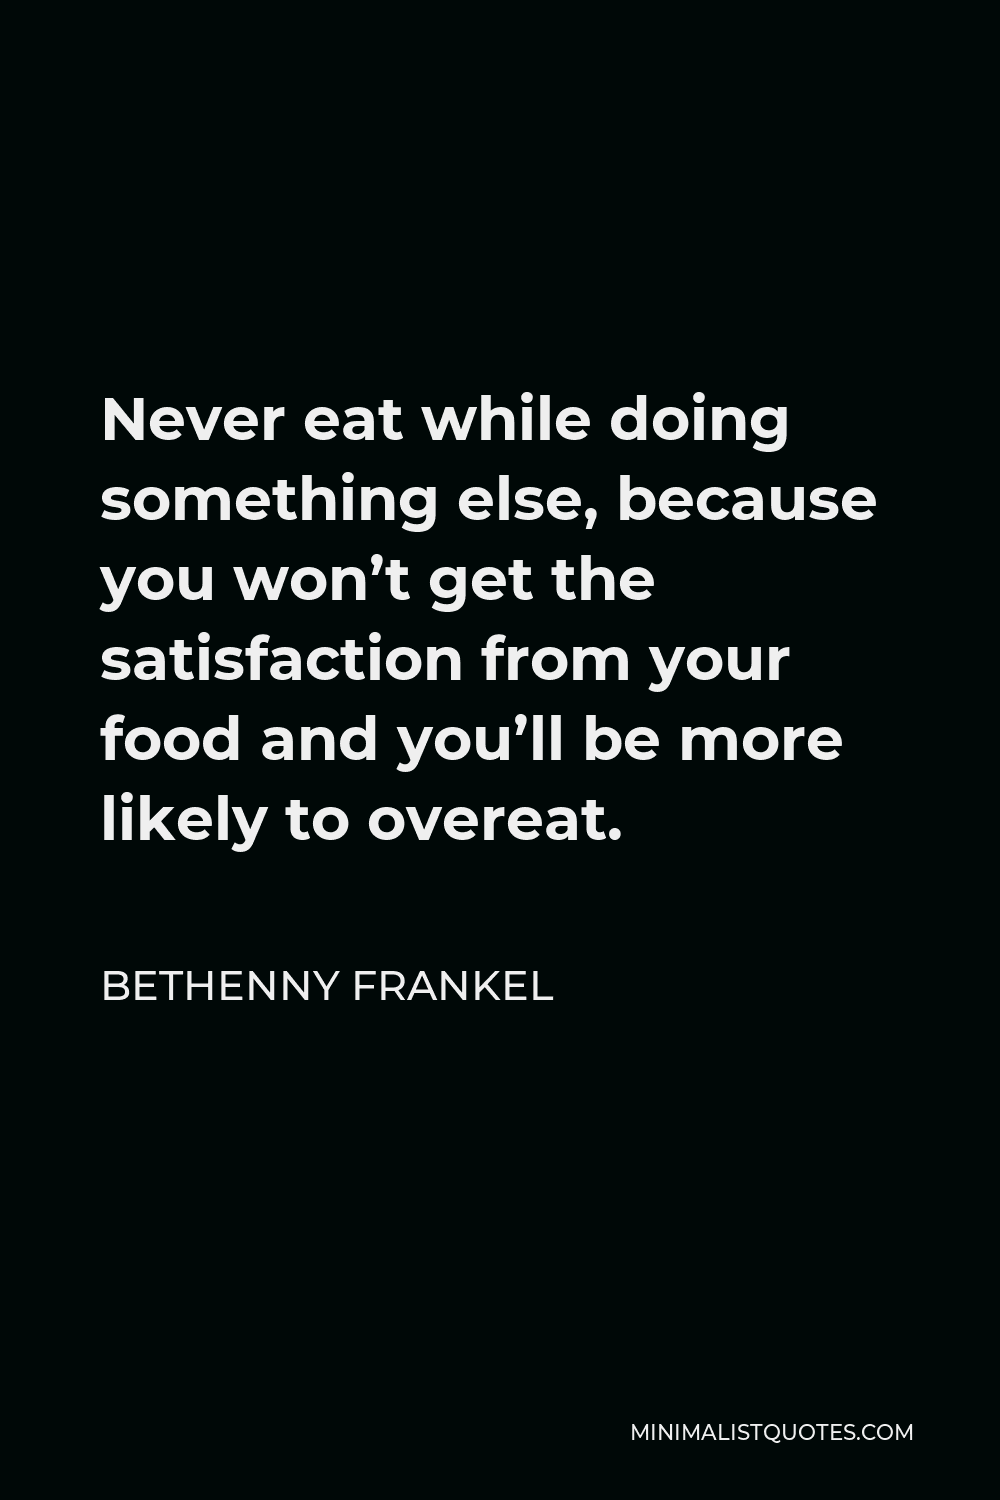 Bethenny Frankel Quote - Never eat while doing something else, because you won’t get the satisfaction from your food and you’ll be more likely to overeat.